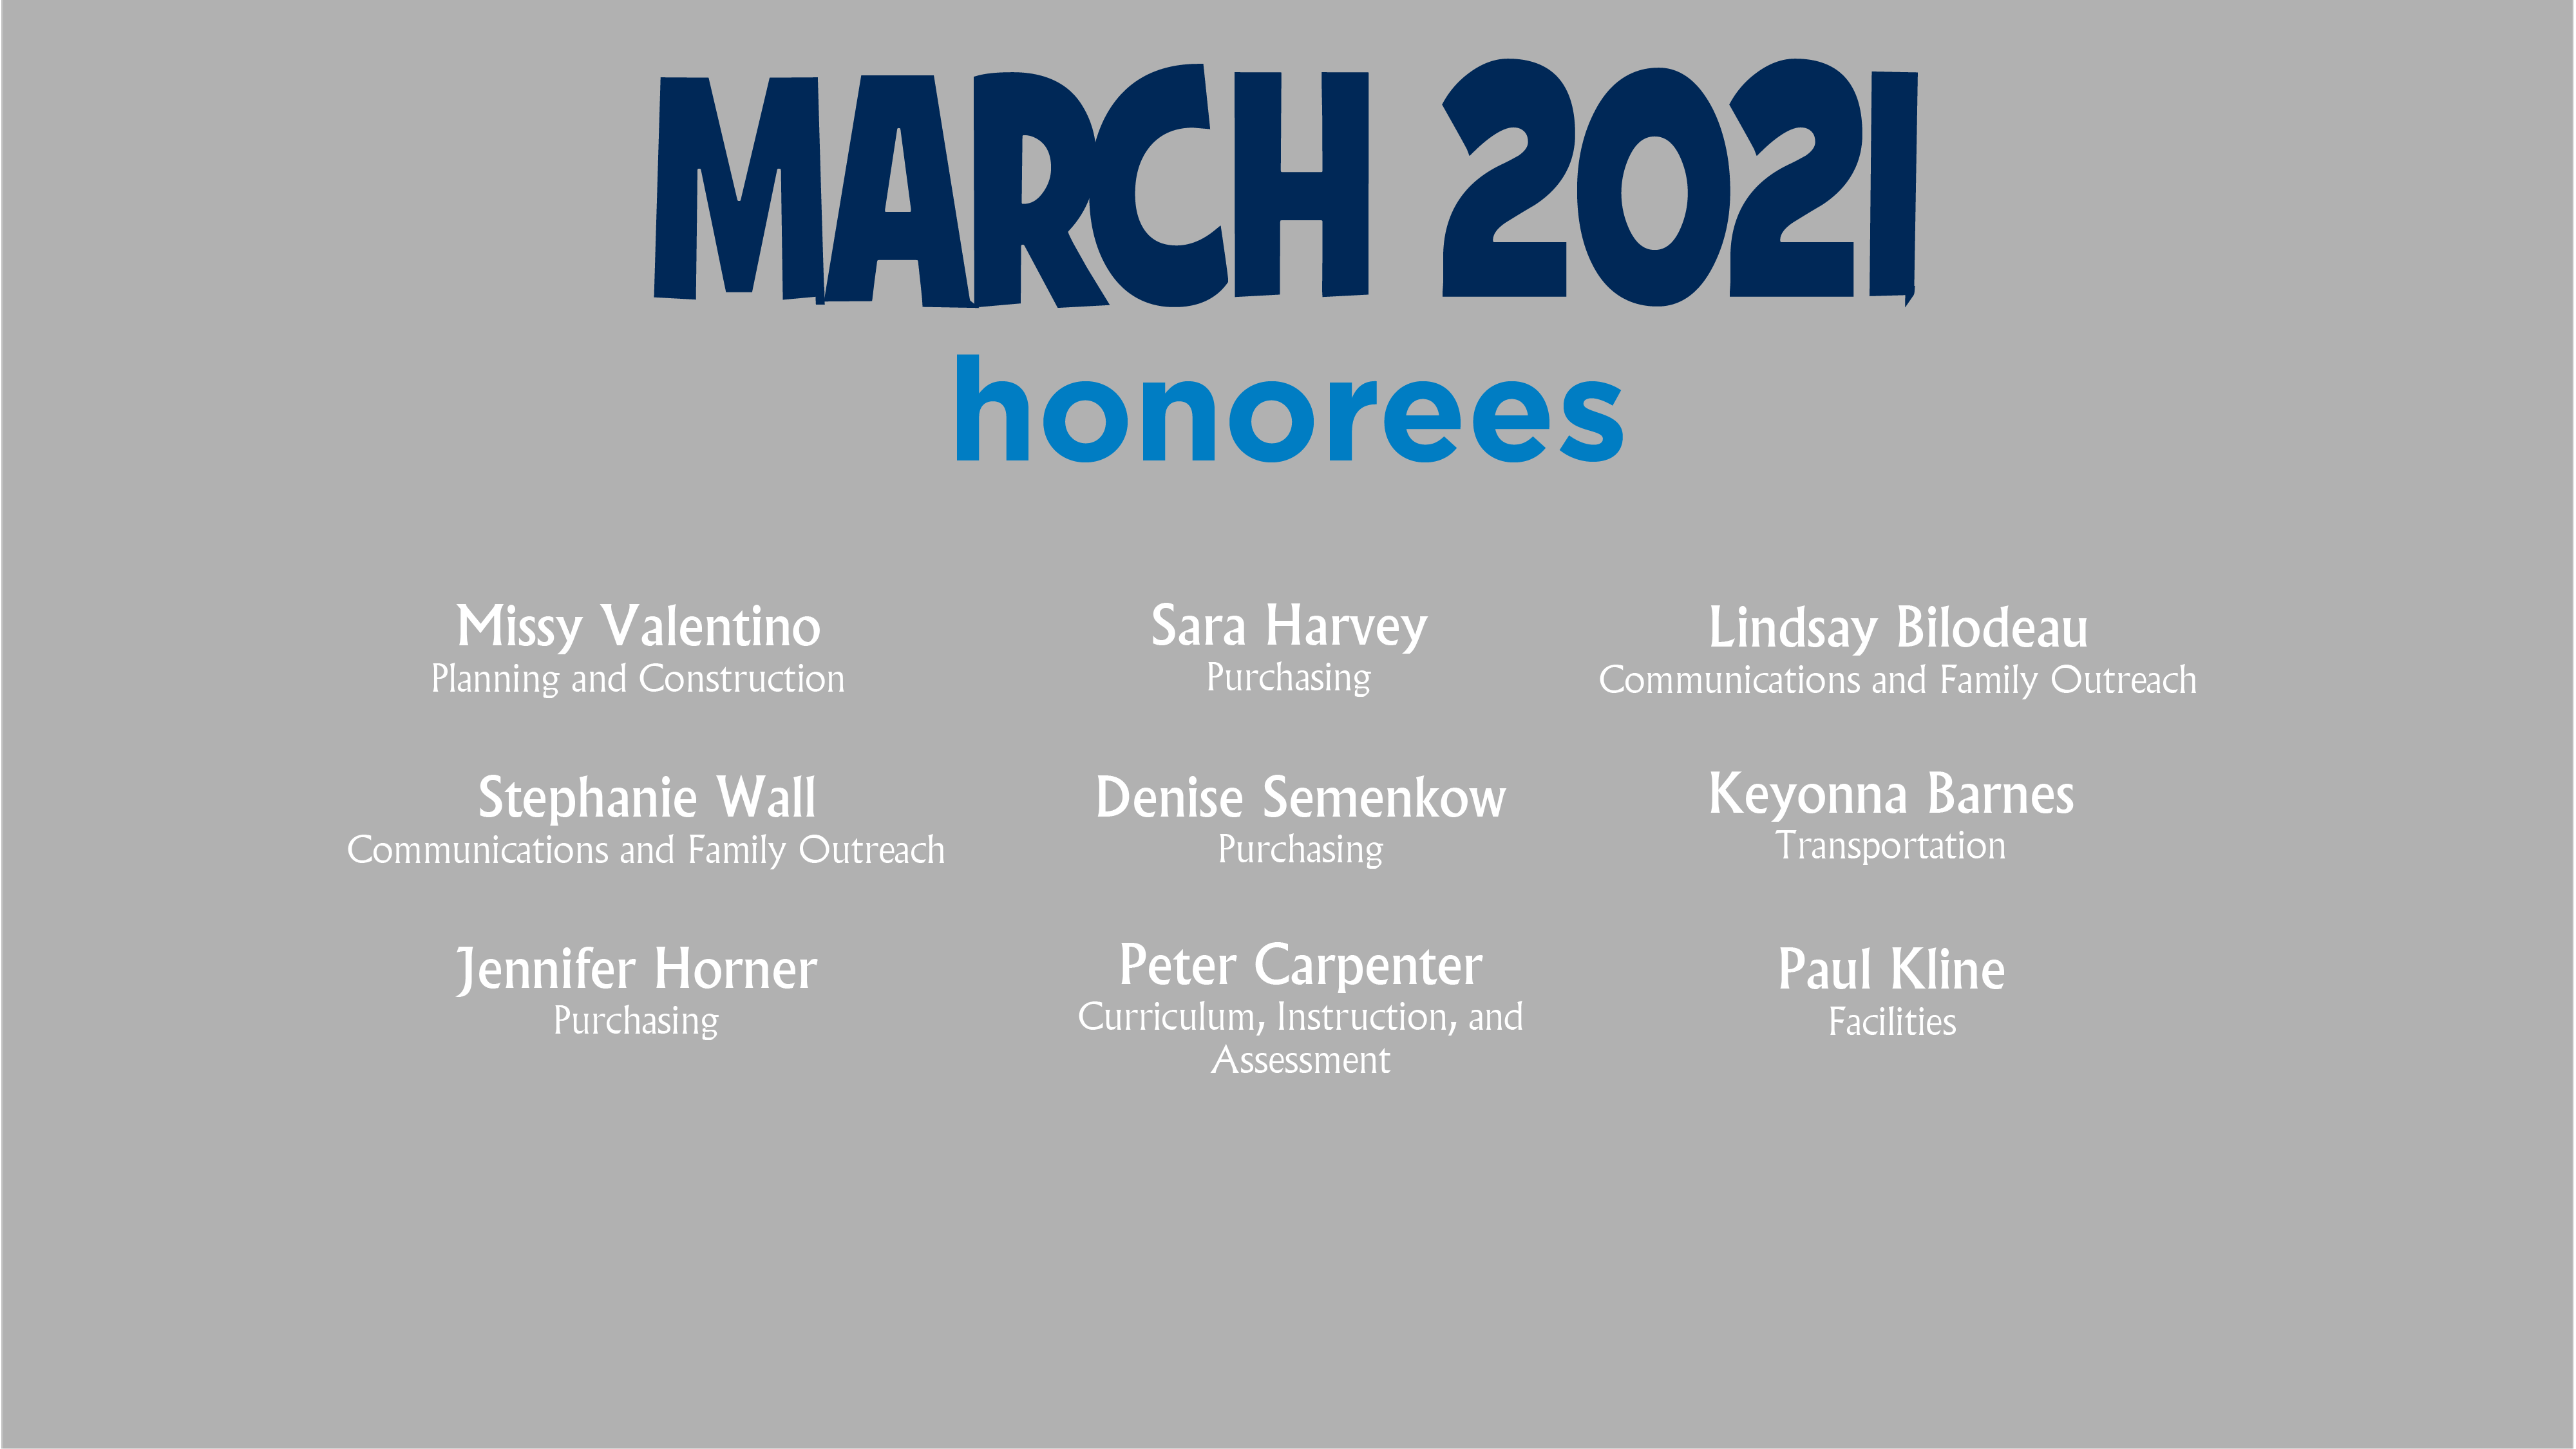 HCPS Bowtie Breakfast Honorees - March 2021